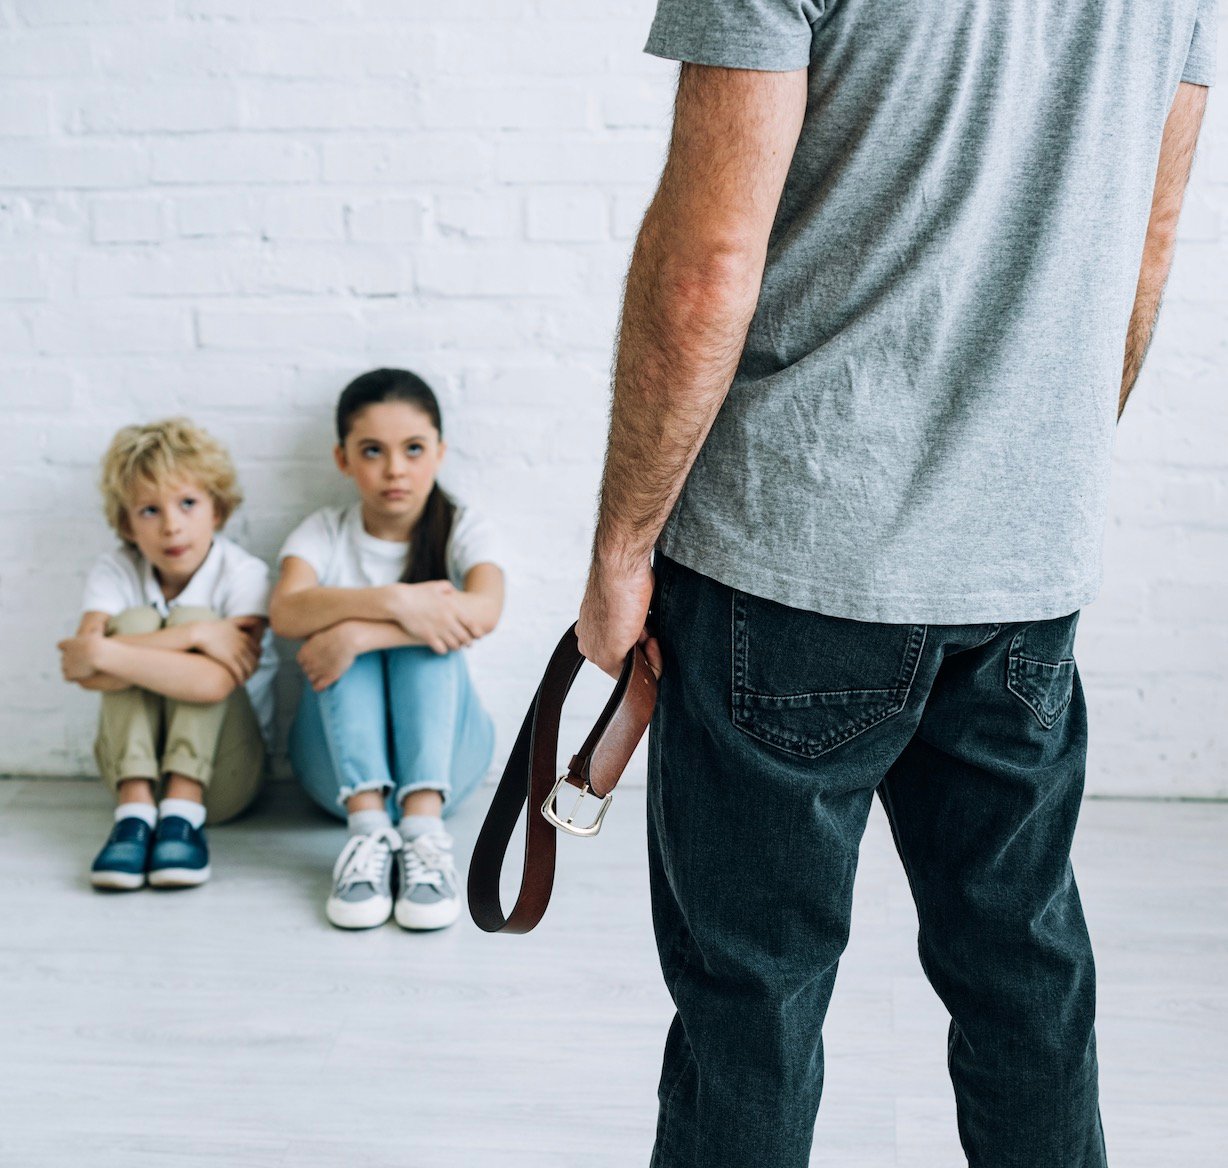 What is the definition of an unstable parent according to SA Law?